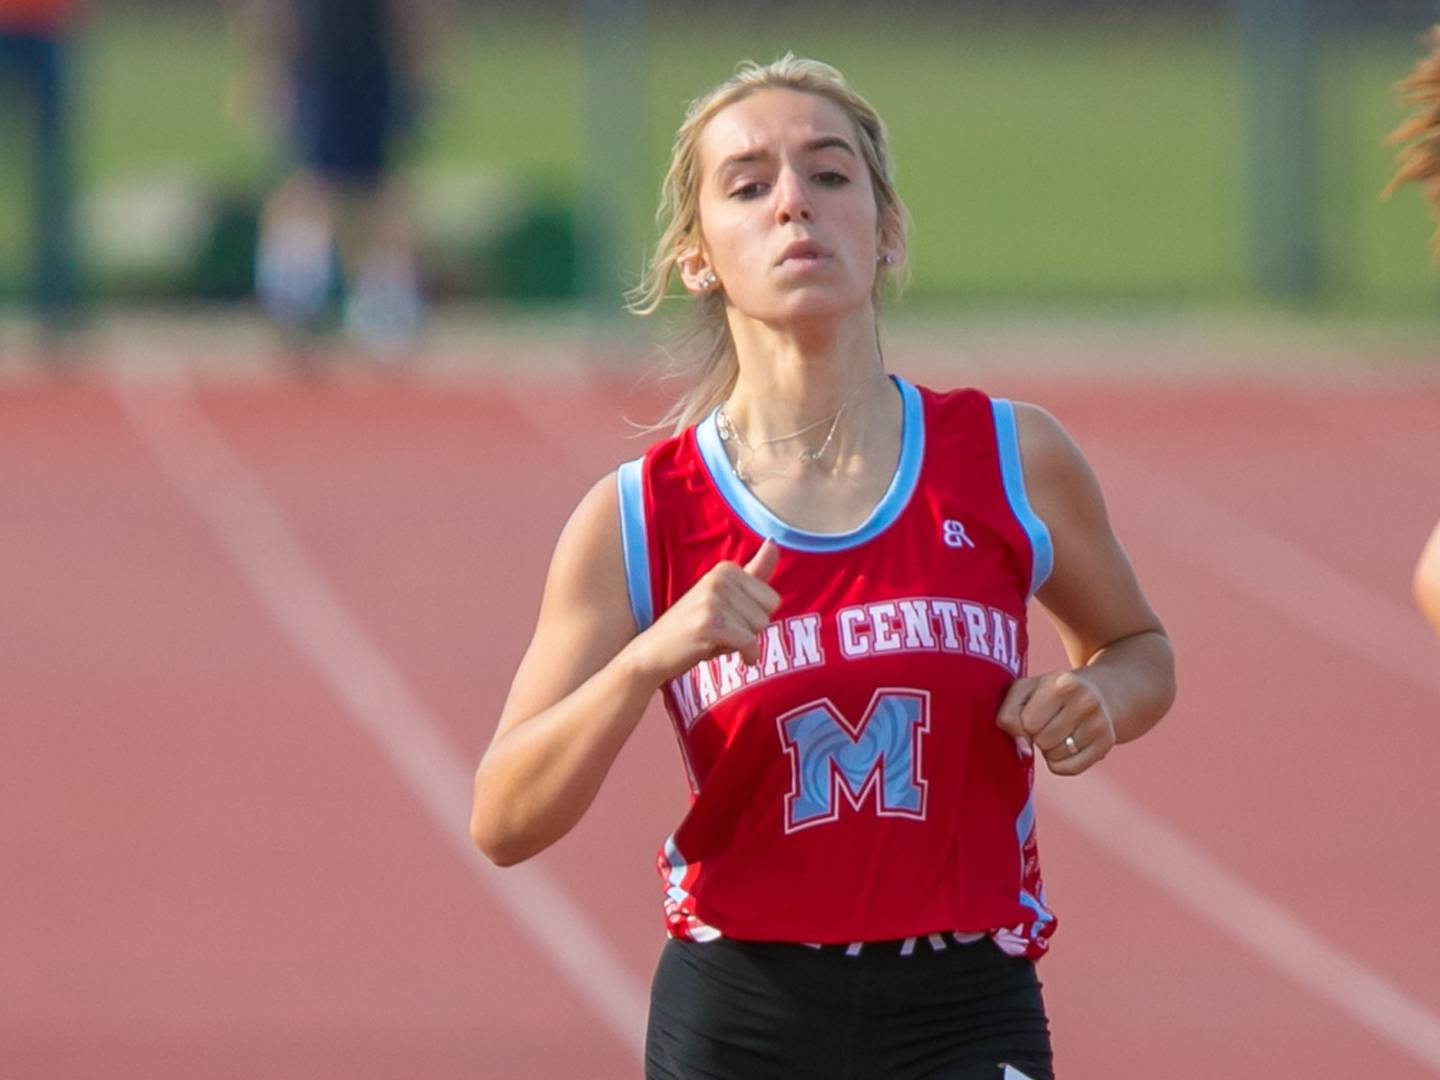 Marian Central's Bella Zecchin finishes second place in the 400-meter run on June 2, 2021 at the Class 2A Carmel Sectional in Mundelein.